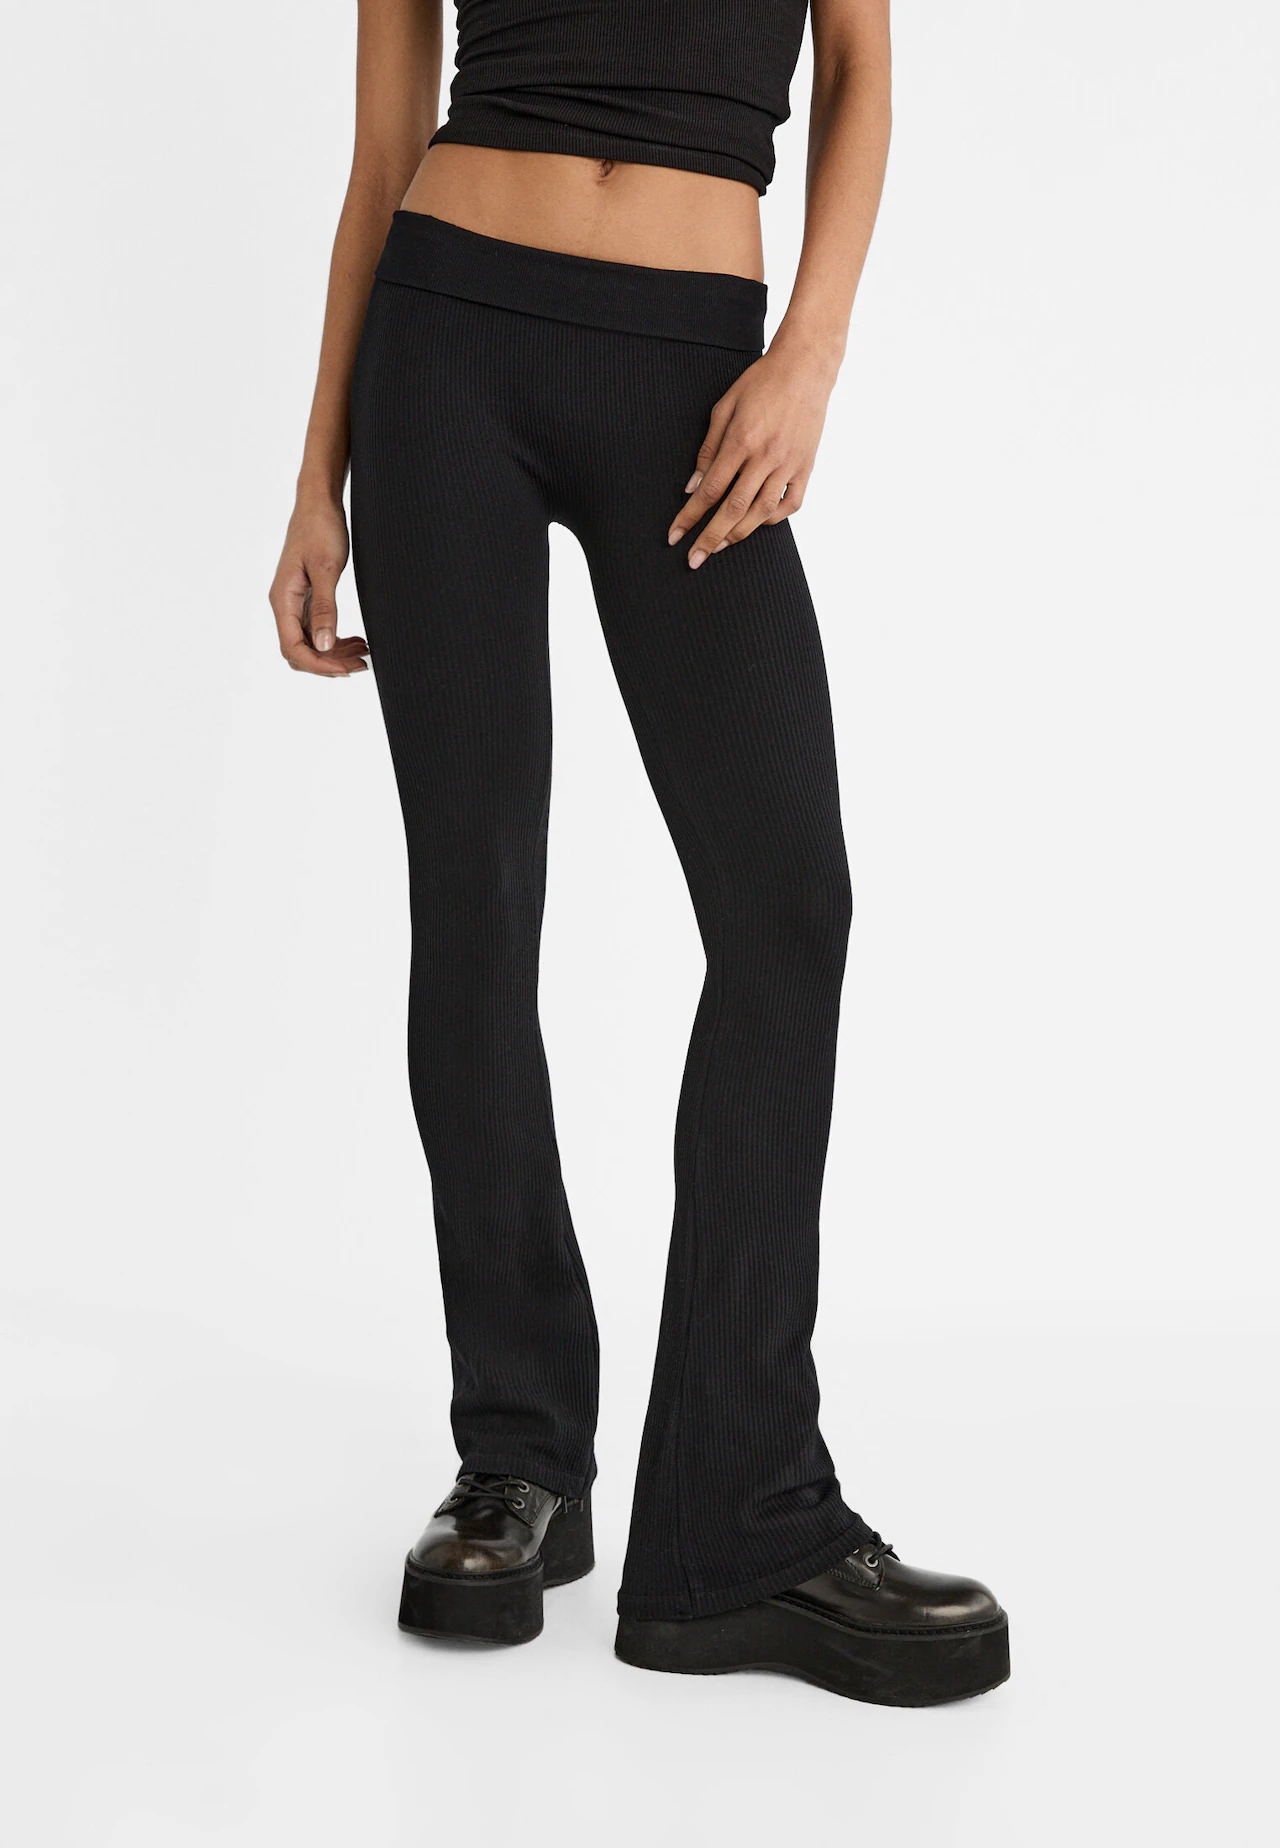 Stradivarius seamless legging with deep waist in washed blue